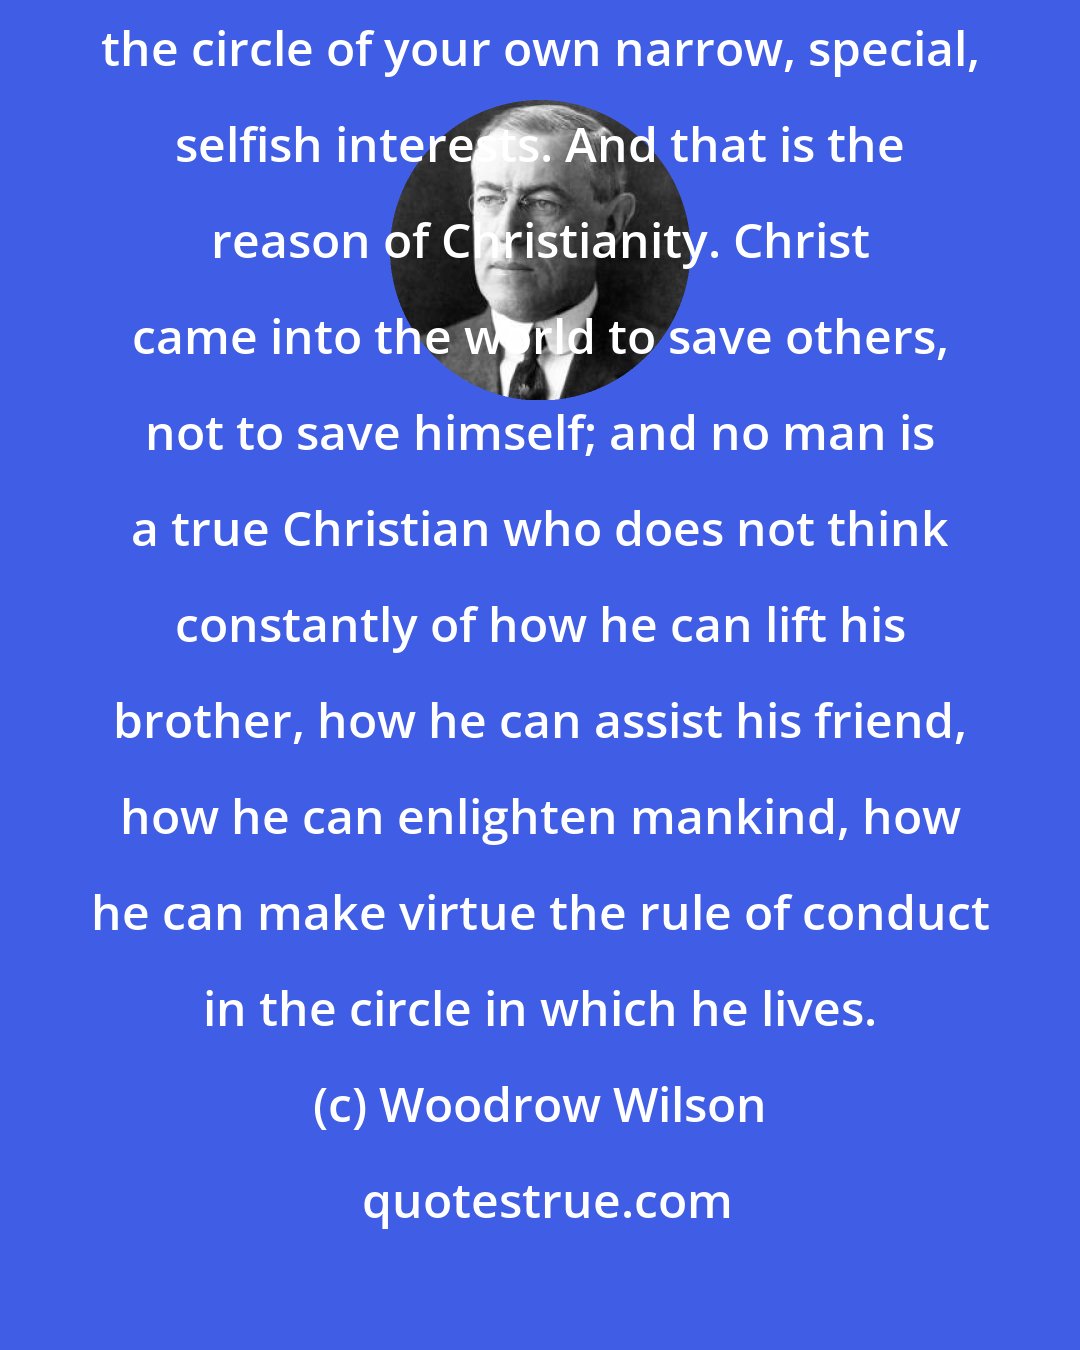 Woodrow Wilson: The only way your powers can become great is by exerting them outside the circle of your own narrow, special, selfish interests. And that is the reason of Christianity. Christ came into the world to save others, not to save himself; and no man is a true Christian who does not think constantly of how he can lift his brother, how he can assist his friend, how he can enlighten mankind, how he can make virtue the rule of conduct in the circle in which he lives.